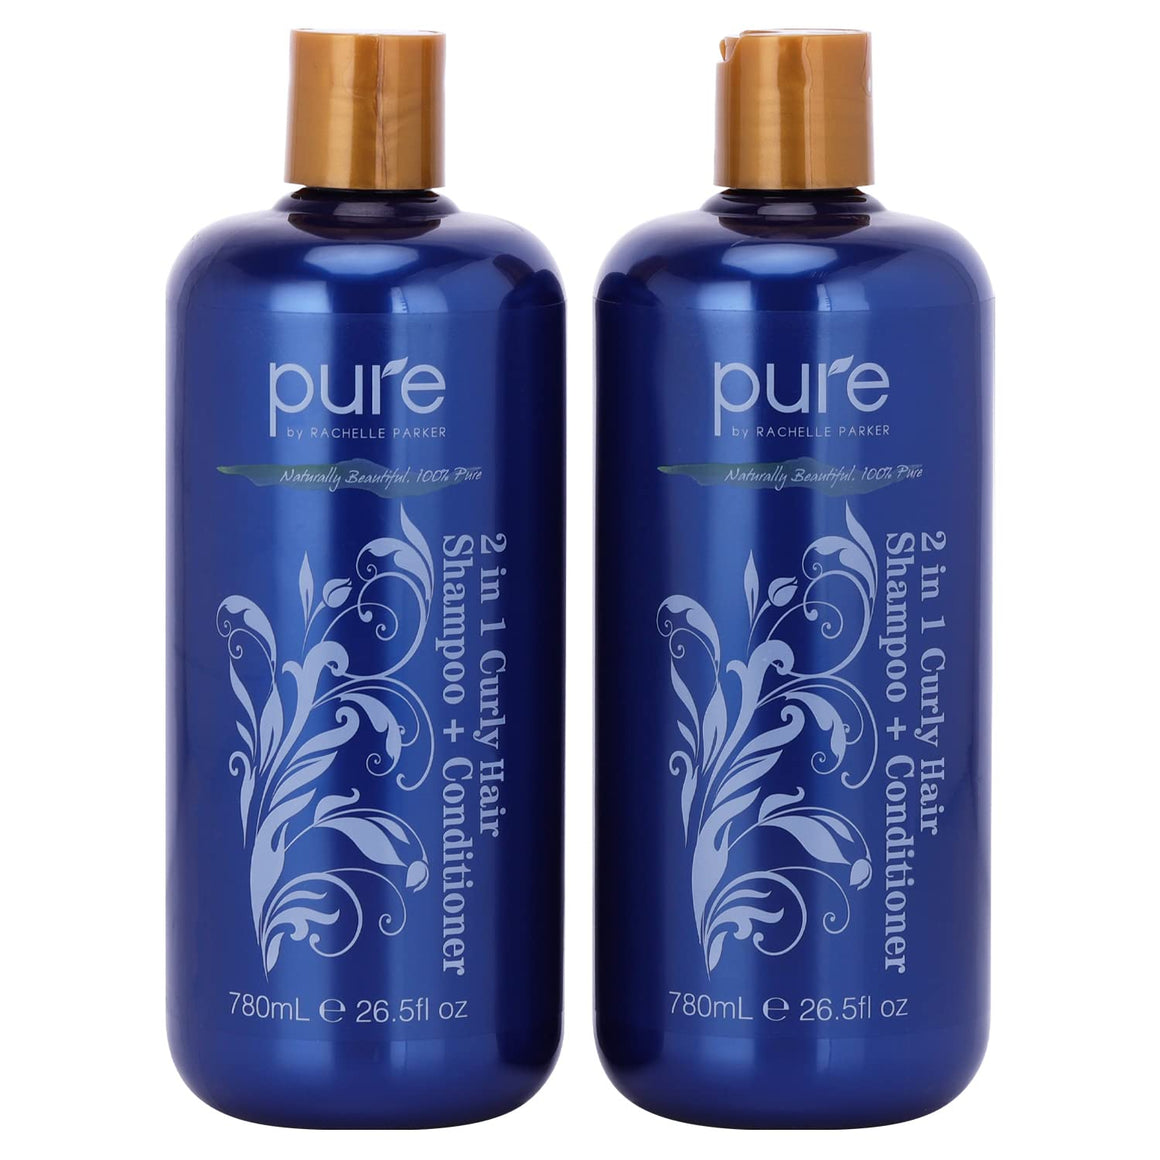 Curly Hair Shampoo and Conditioner Combo for Thicker, Healthier Hair 2-in-1 Shampoo + Conditioner in 1!! (2 Bottles included)